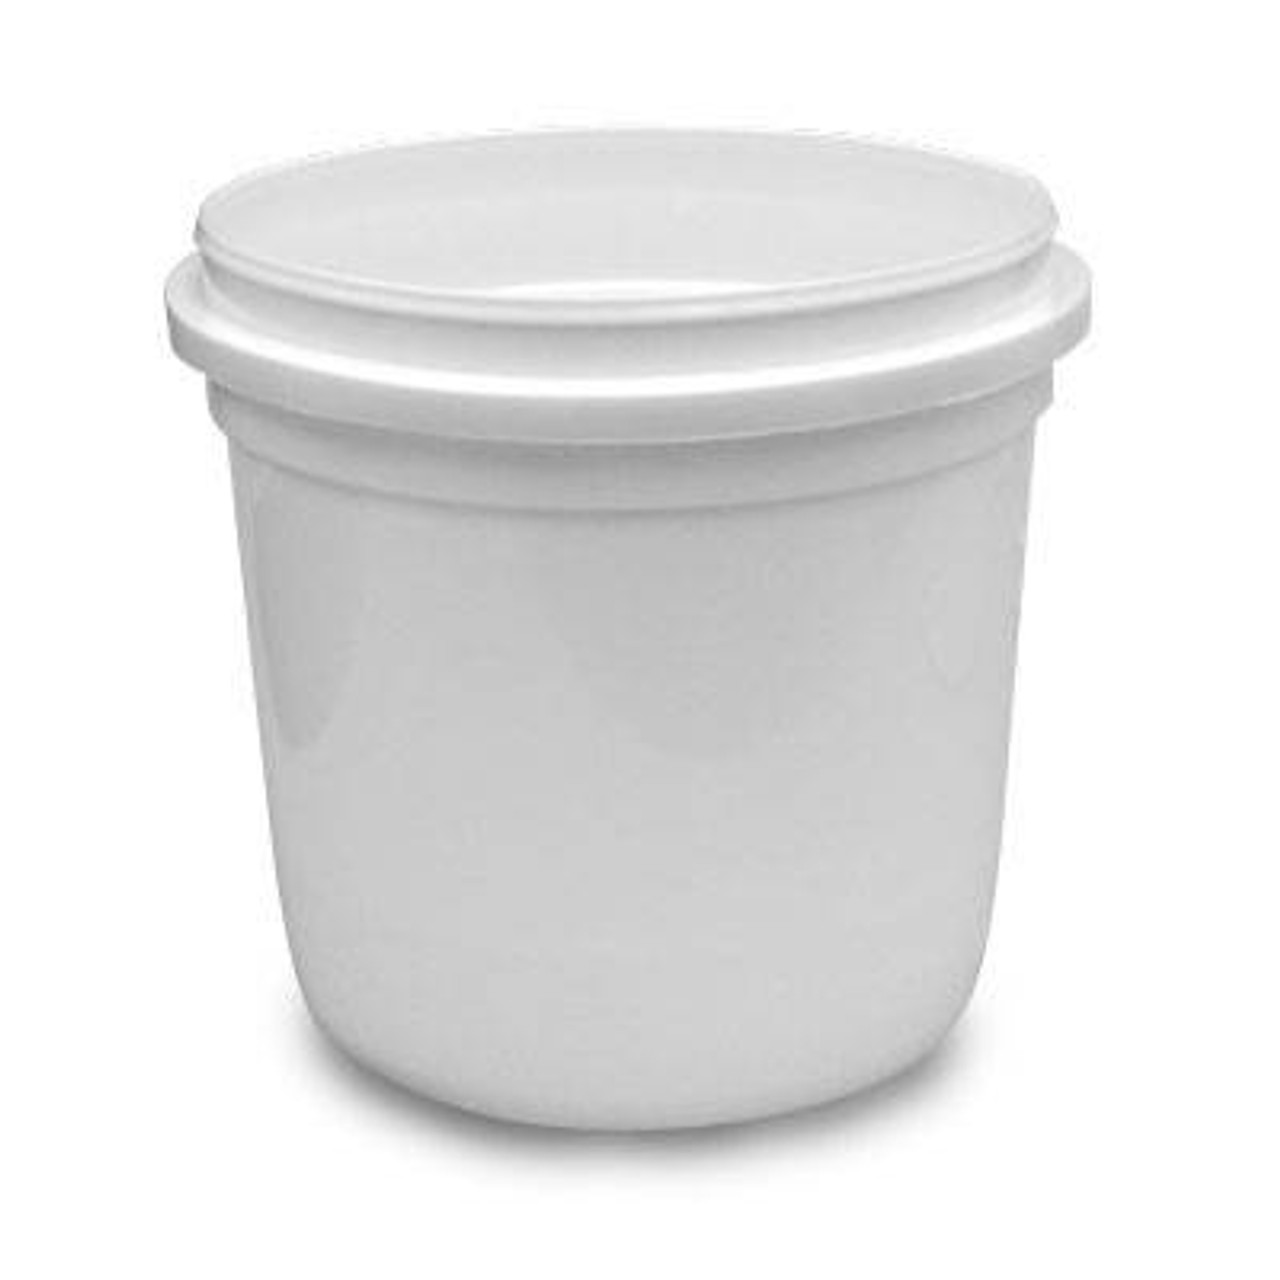 64 oz Plastic Container with Lid